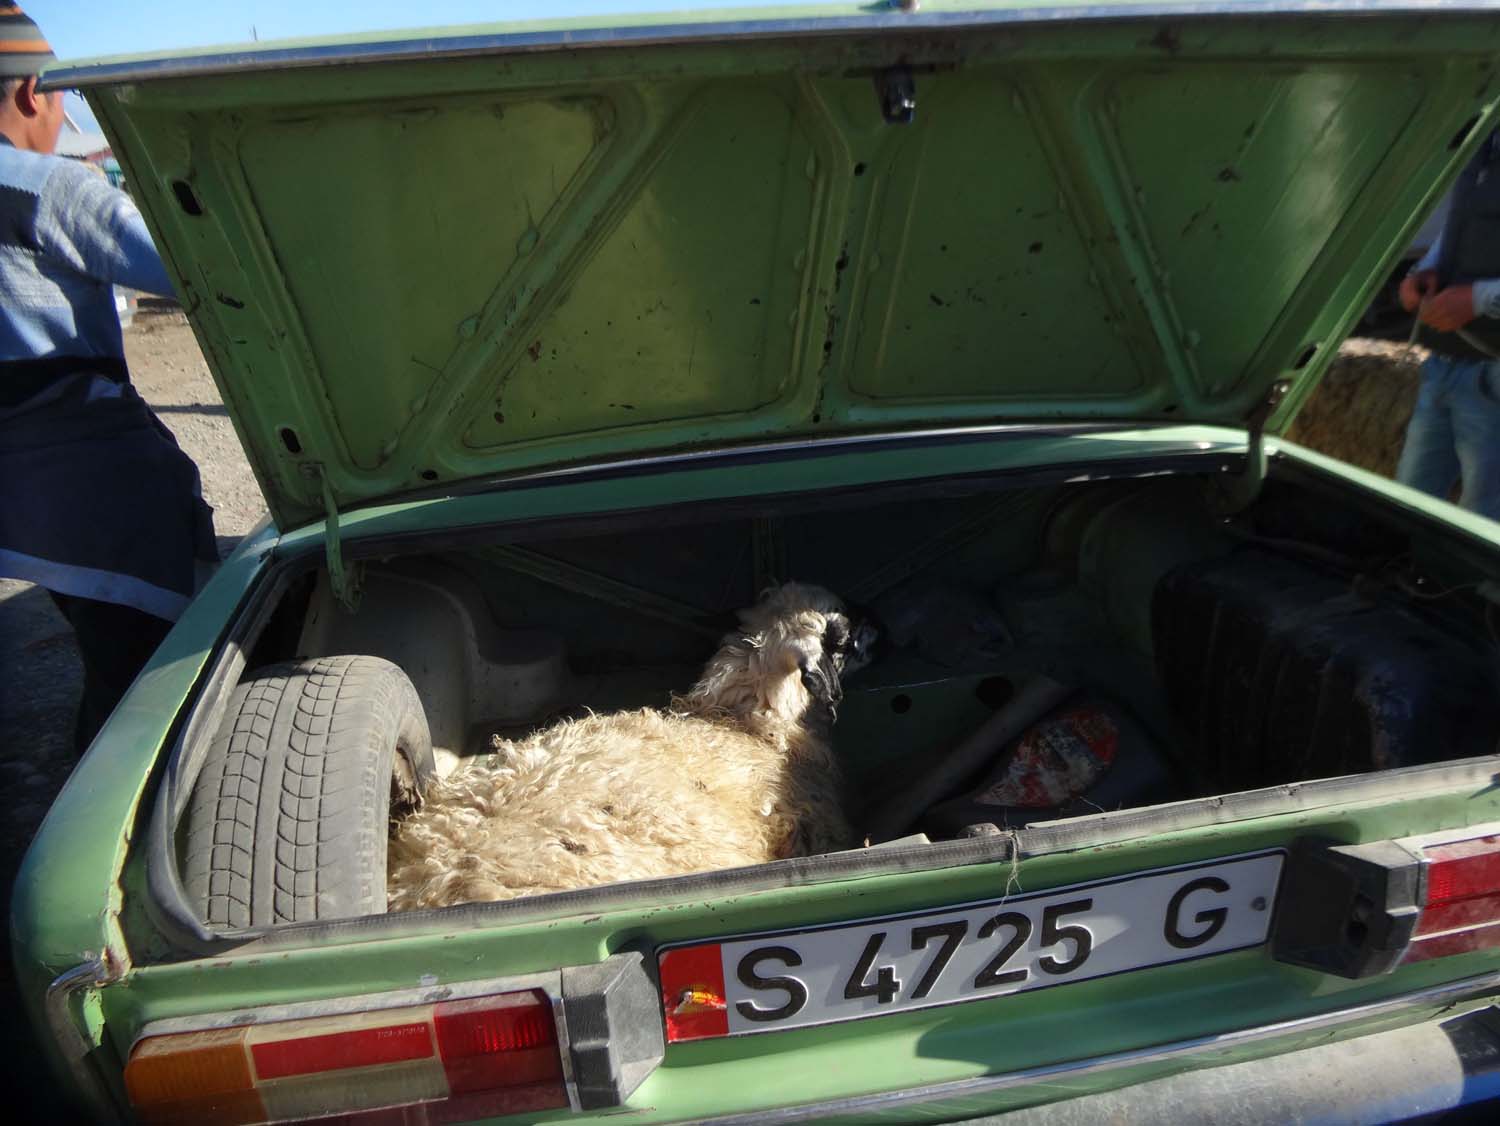 how do you transport your new sheep? in the boot of course